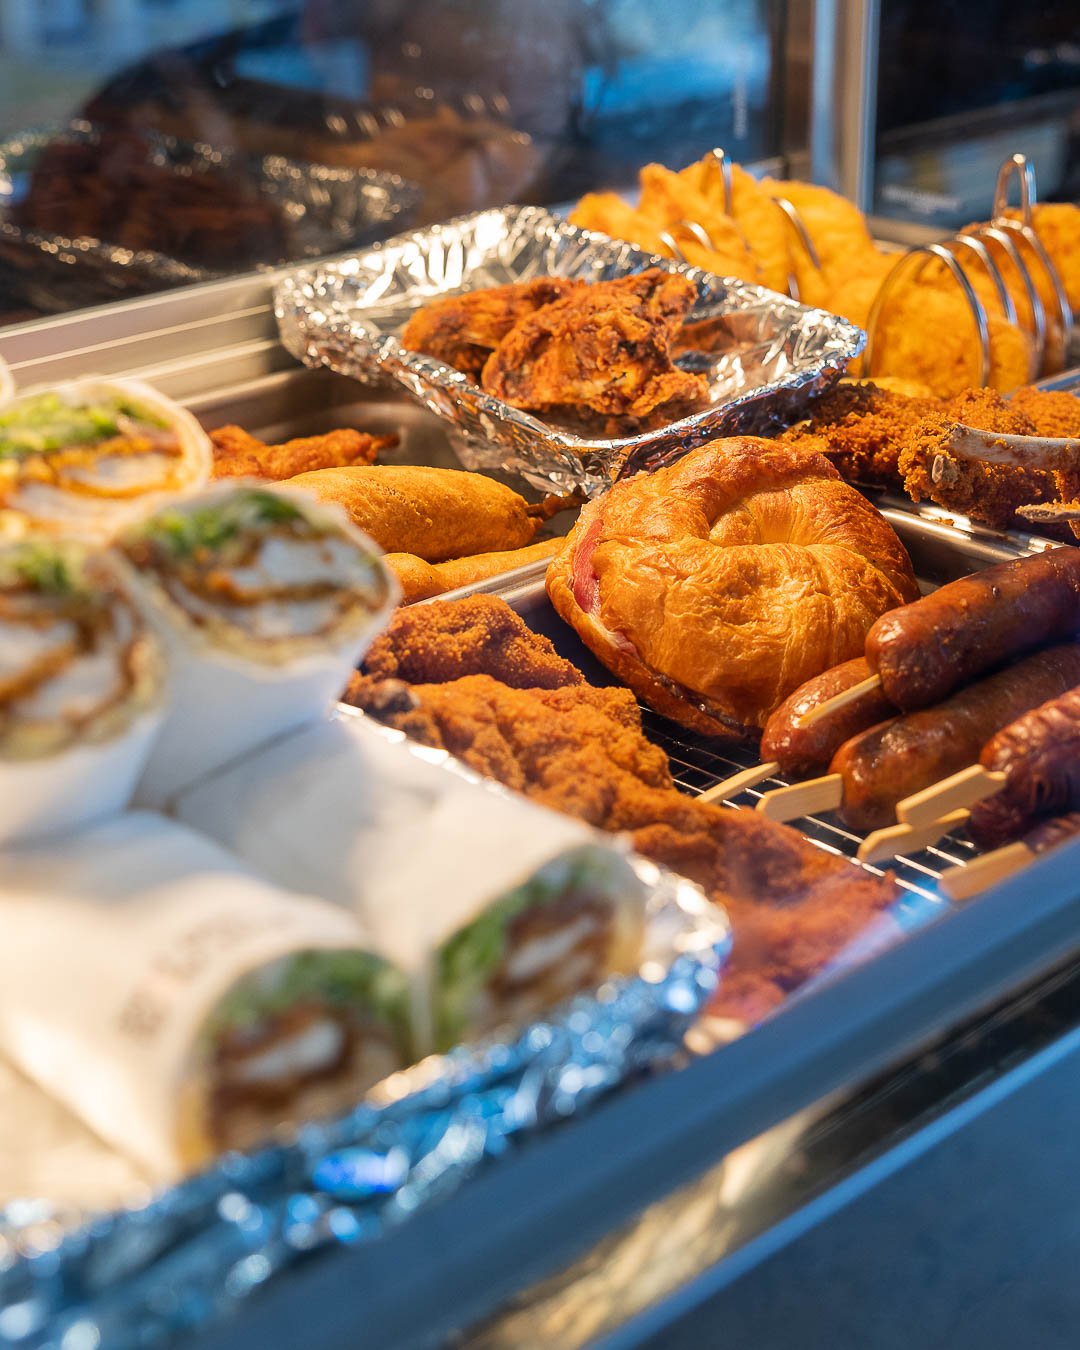 Hot food in the Bain-marie including ham and cheese croissant, dagwood dog, chicken wings, crumbed lamb cutlets and scallops